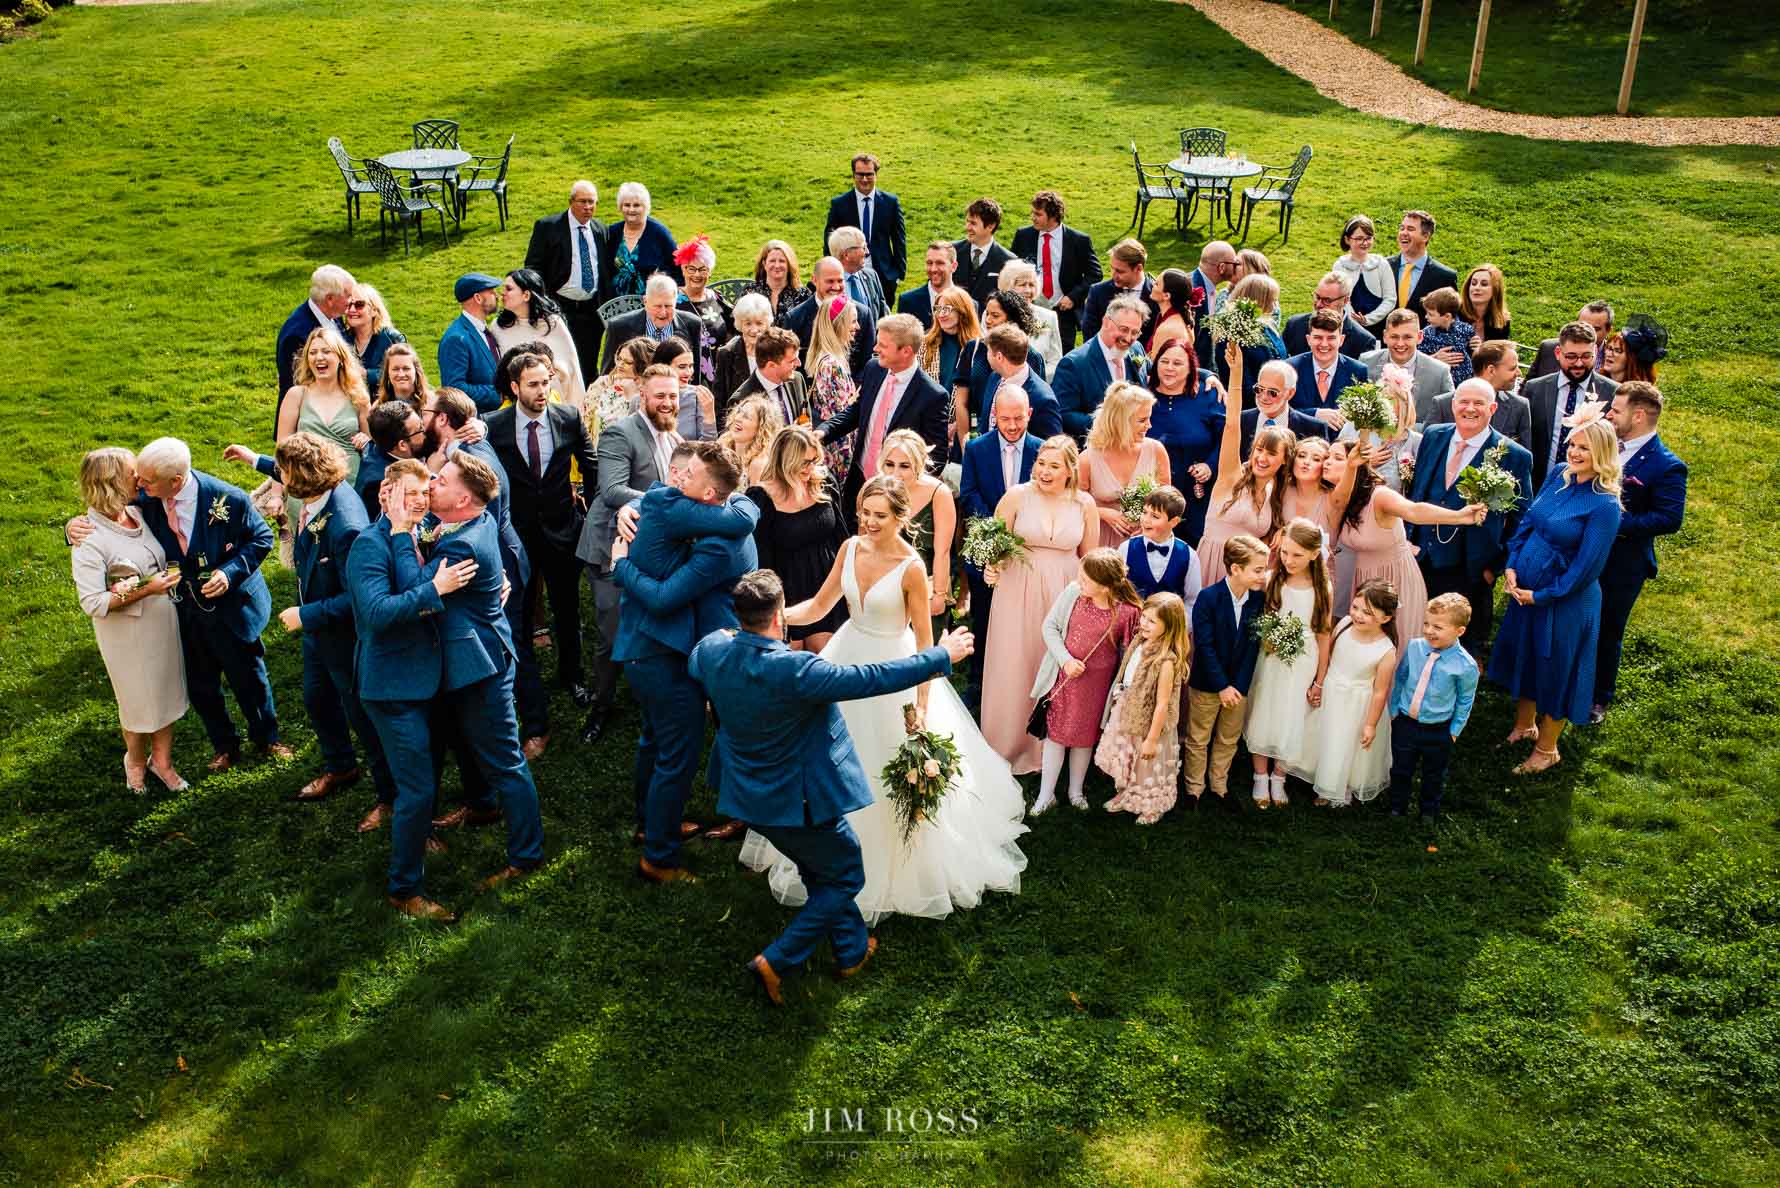 daft moment for entire wedding party on the lawn